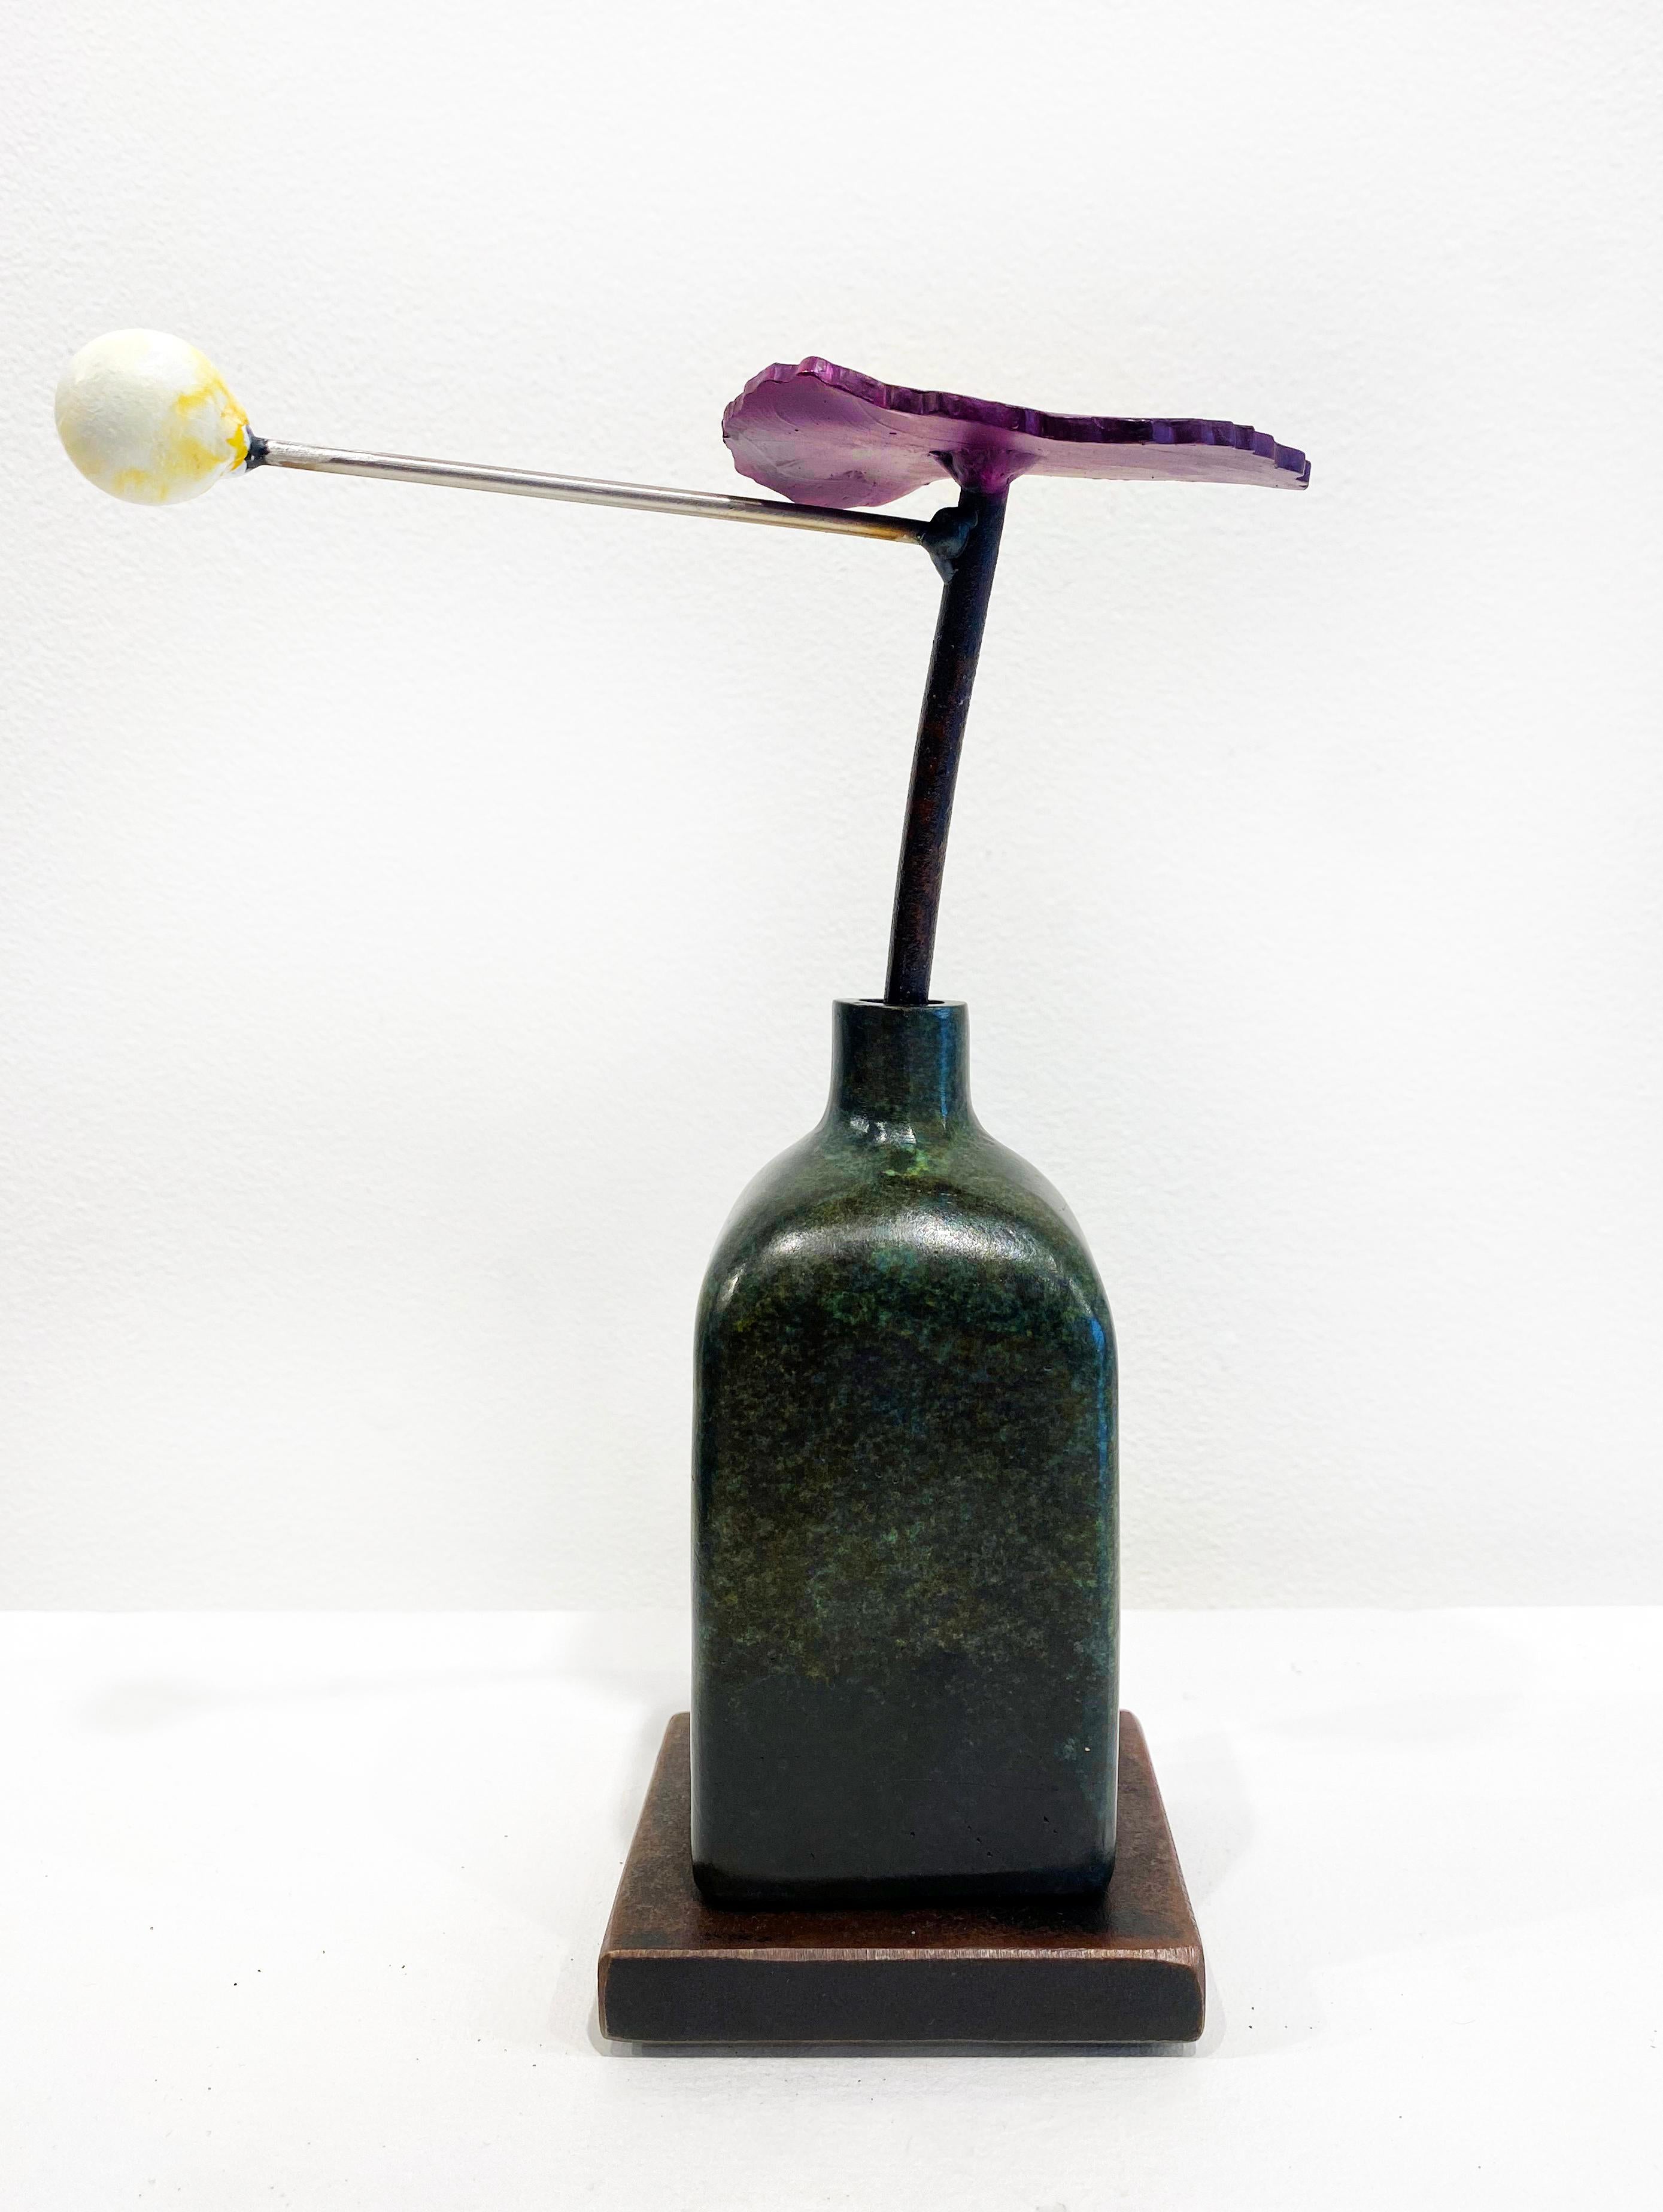 'Planet Purple Zinnia' by David Kimball Anderson, 2022. Bronze, steel, and paint, 7 x 6 x 4 in. This sculpture features a rounded square vase cast in bronze and finished with a green patina. It features a steel flower painted in purple and a white